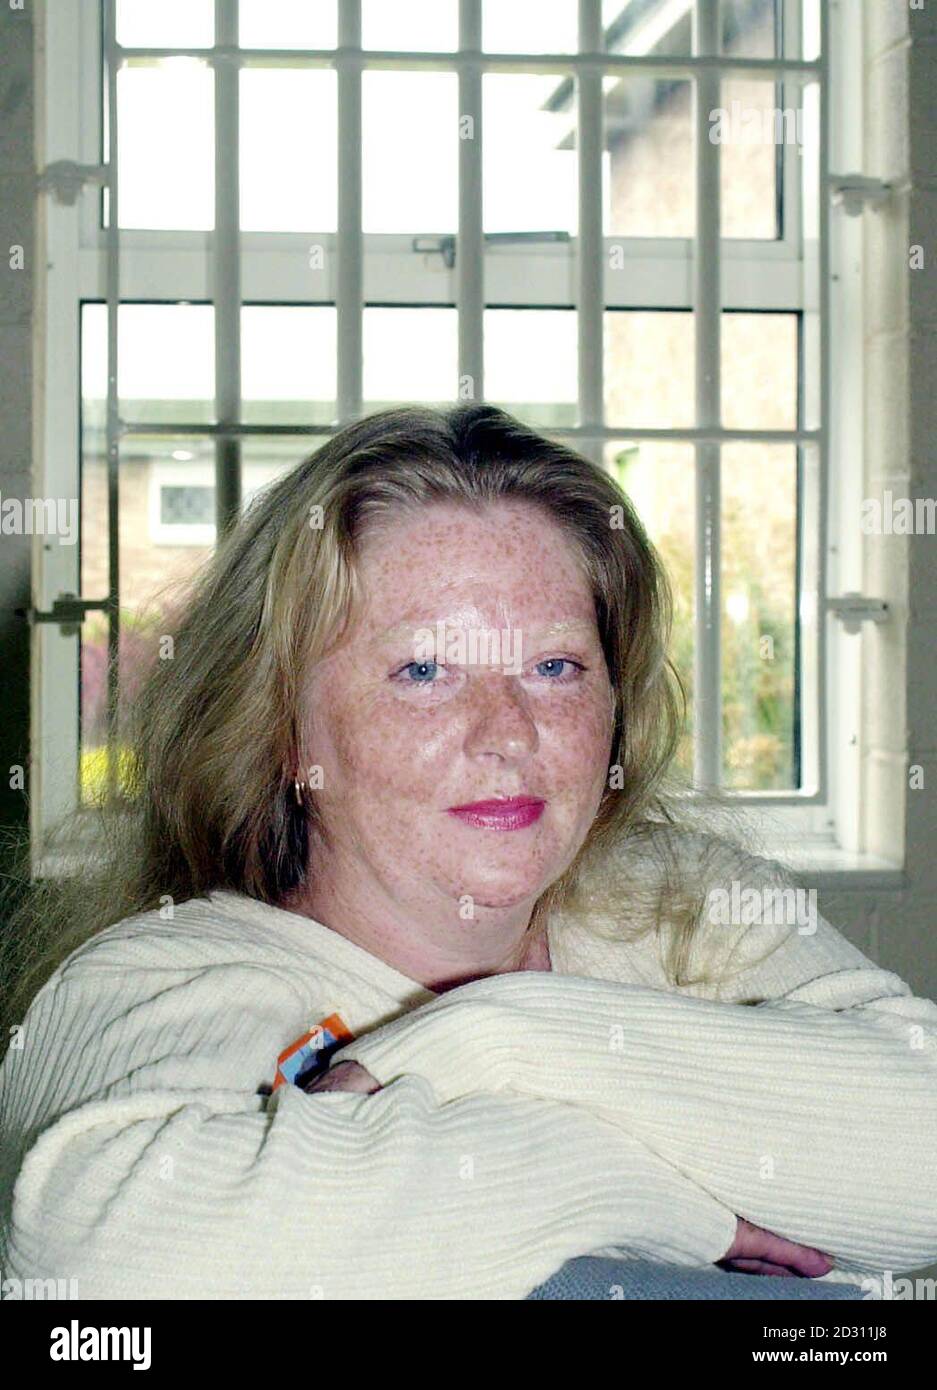 Charlene Dowdeswell, an inmate at HMP Eastwood Park, Bristol. The women's prison has a 'deplorable lack of senior female officers' and 'is struggling to deal with inmates', revealed a report. * Sir David Ramsbotham, chief inspector of prisons, said Eastwood Park had 'considerable potential but lacked direction'. Stock Photo